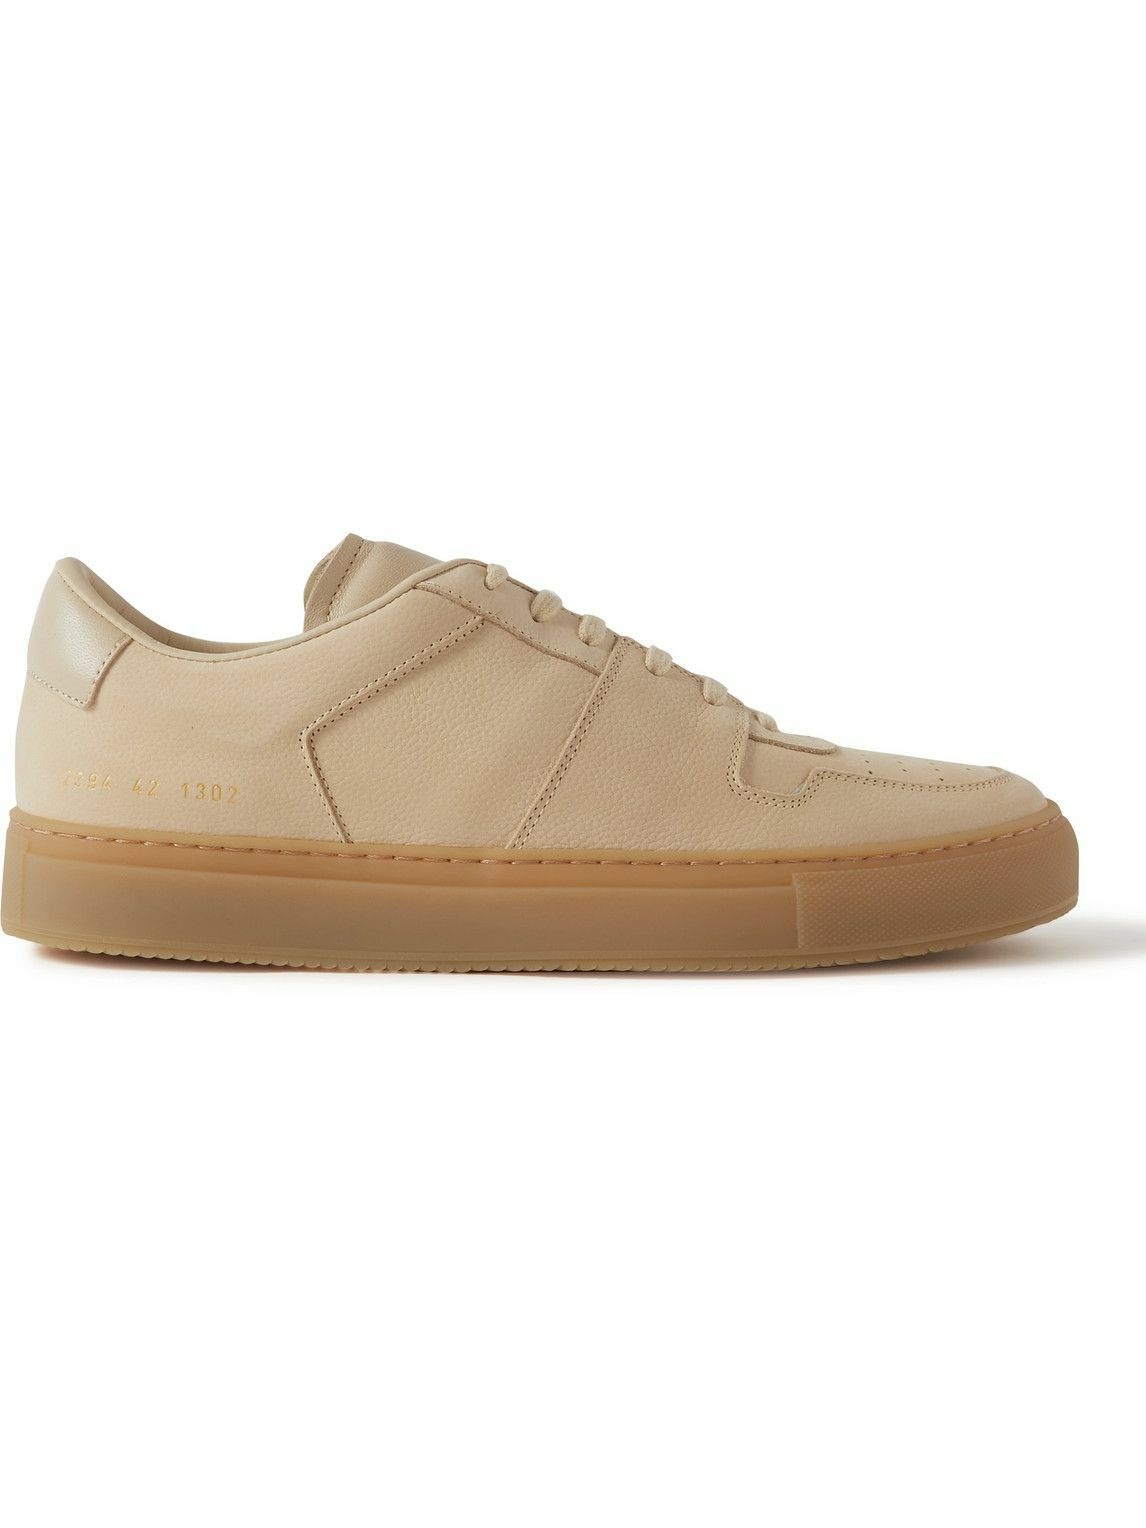 Common Projects - Decades Full-Grain Leather Sneakers - Brown Common ...